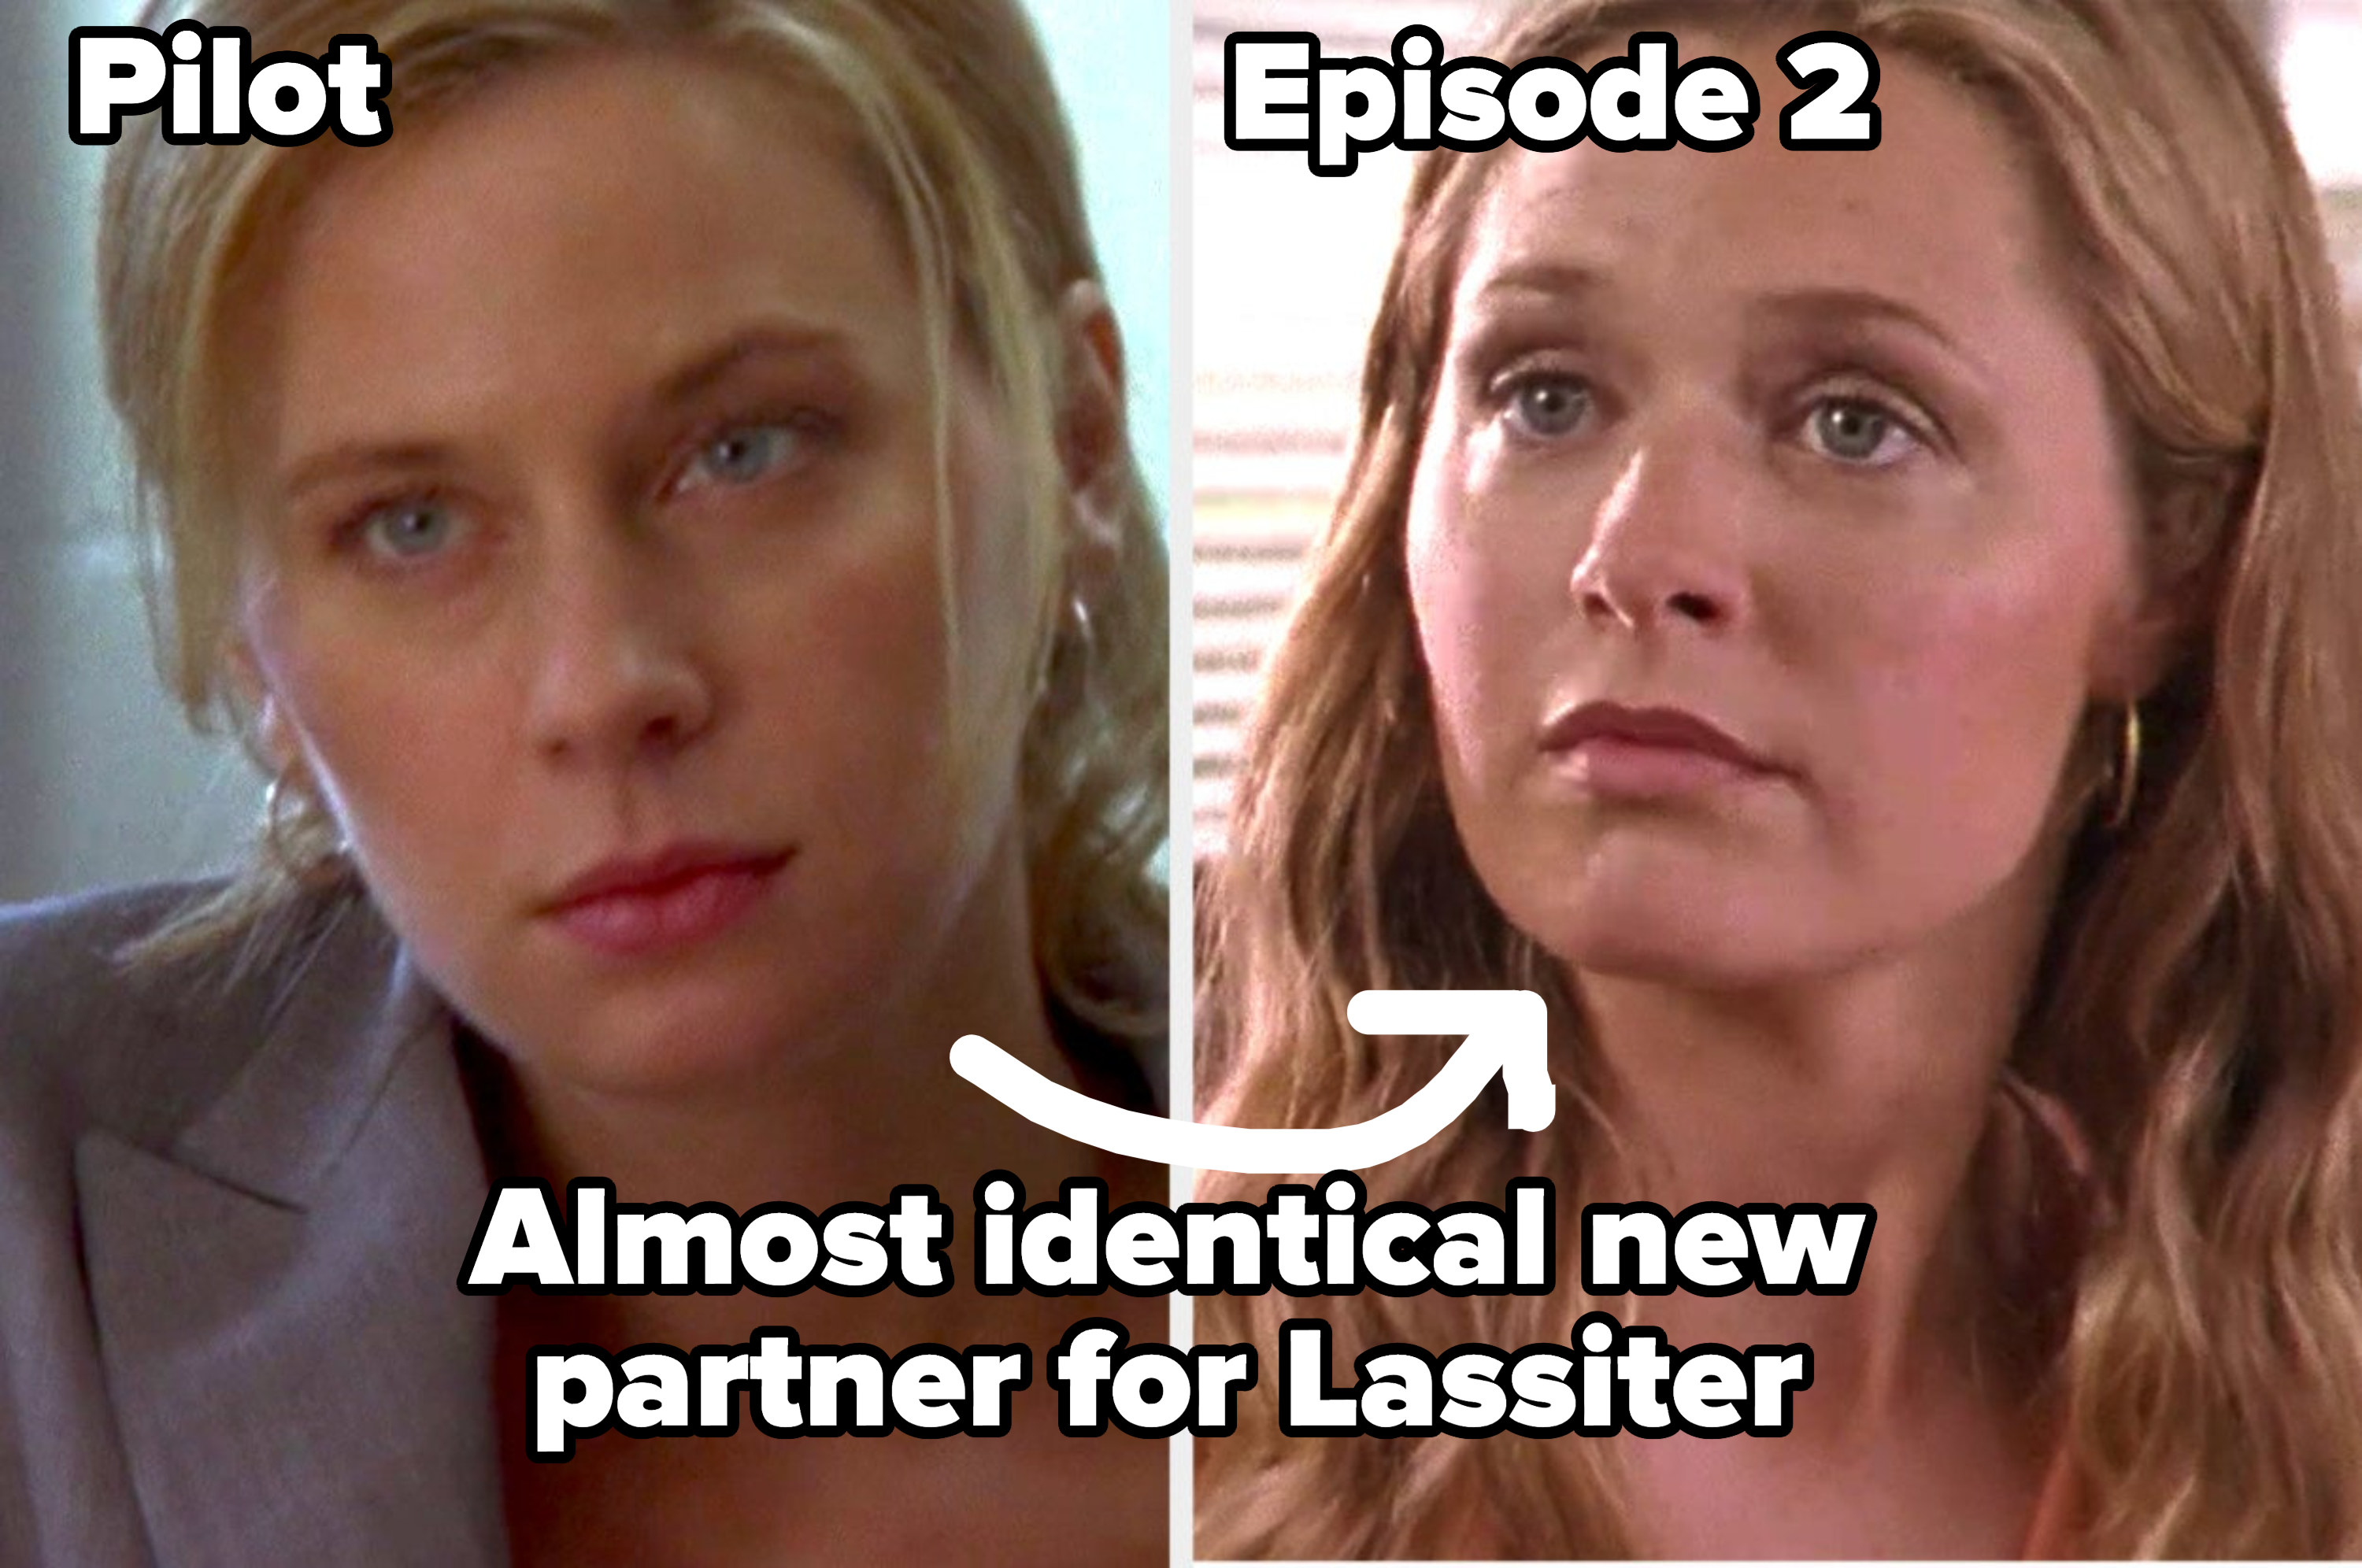 Lucinda in the pilot and Juliet in episode 2 labeled &quot;almost identical new partner for Lassiter&quot;